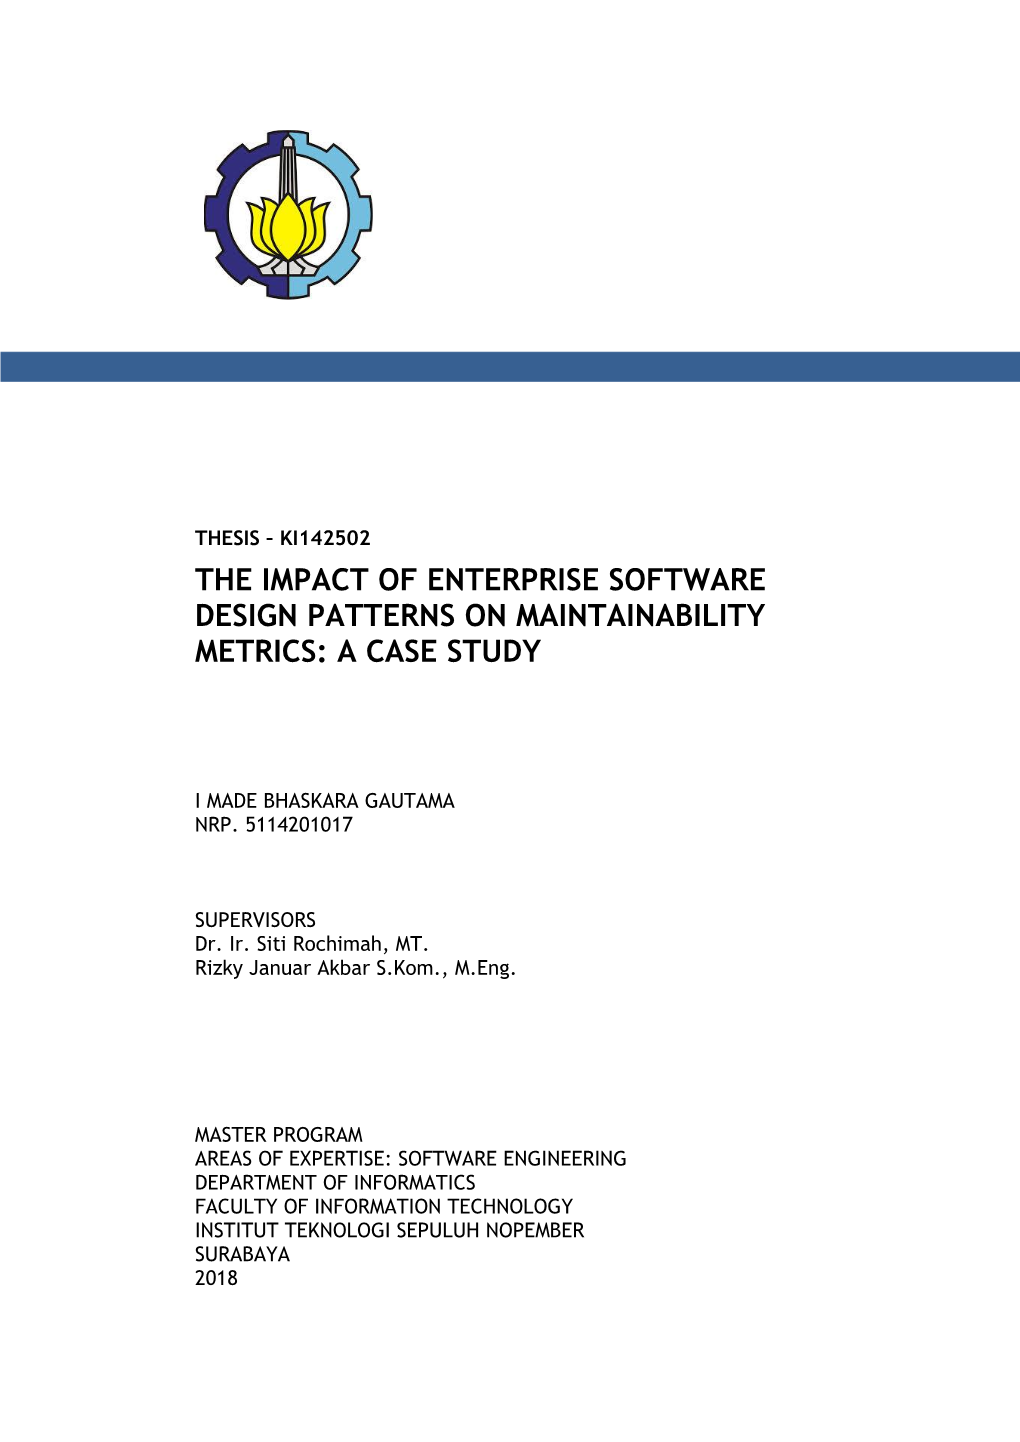 The Impact of Enterprise Software Design Patterns on Maintainability Metrics: a Case Study